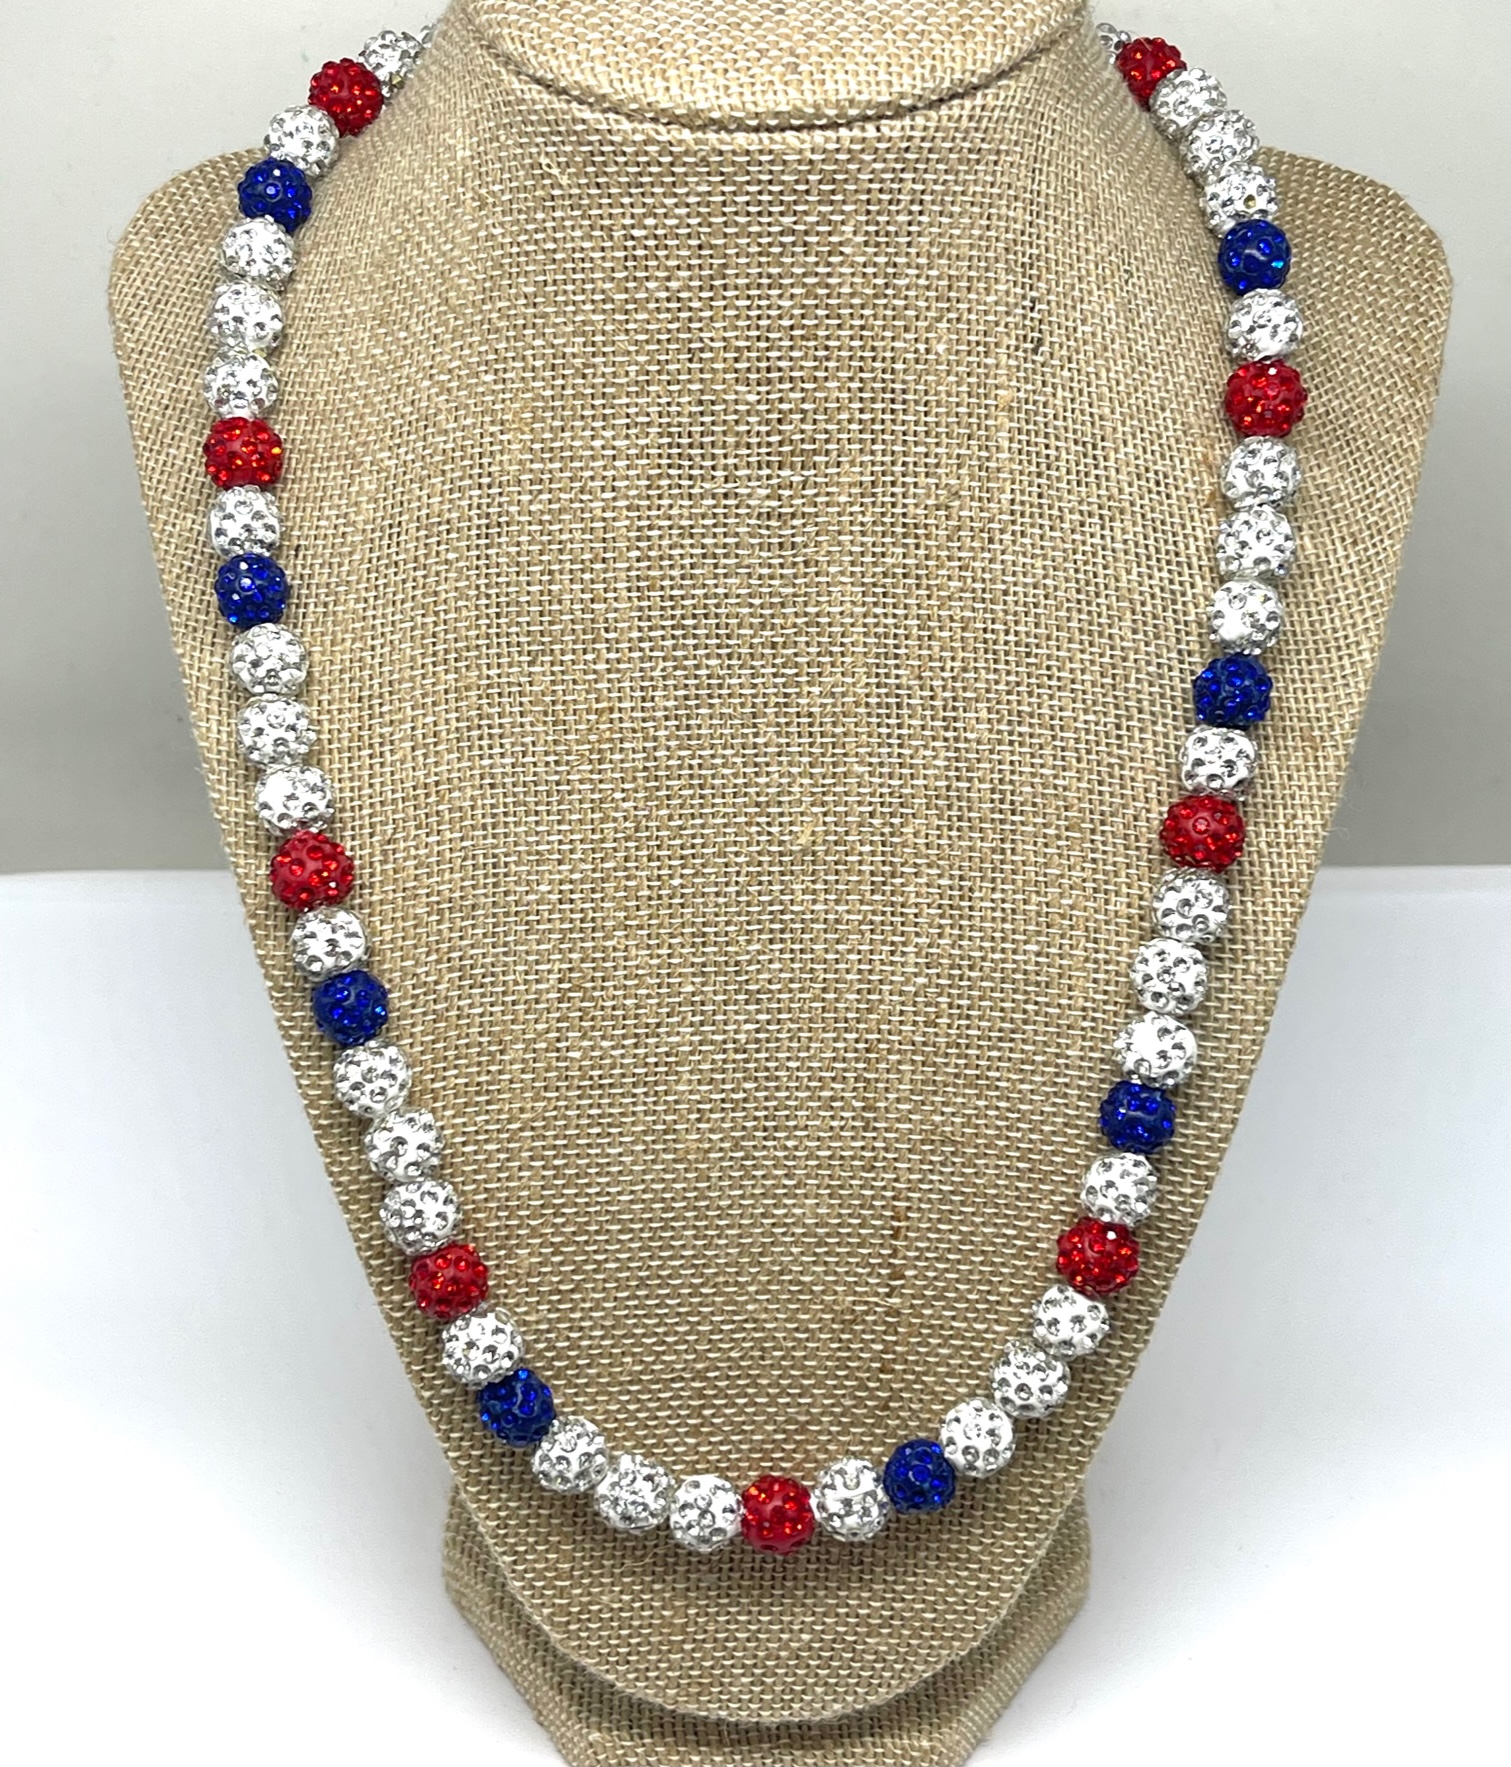 Blue and White Beaded Necklace with Fan Shaped Links - Ruby Lane